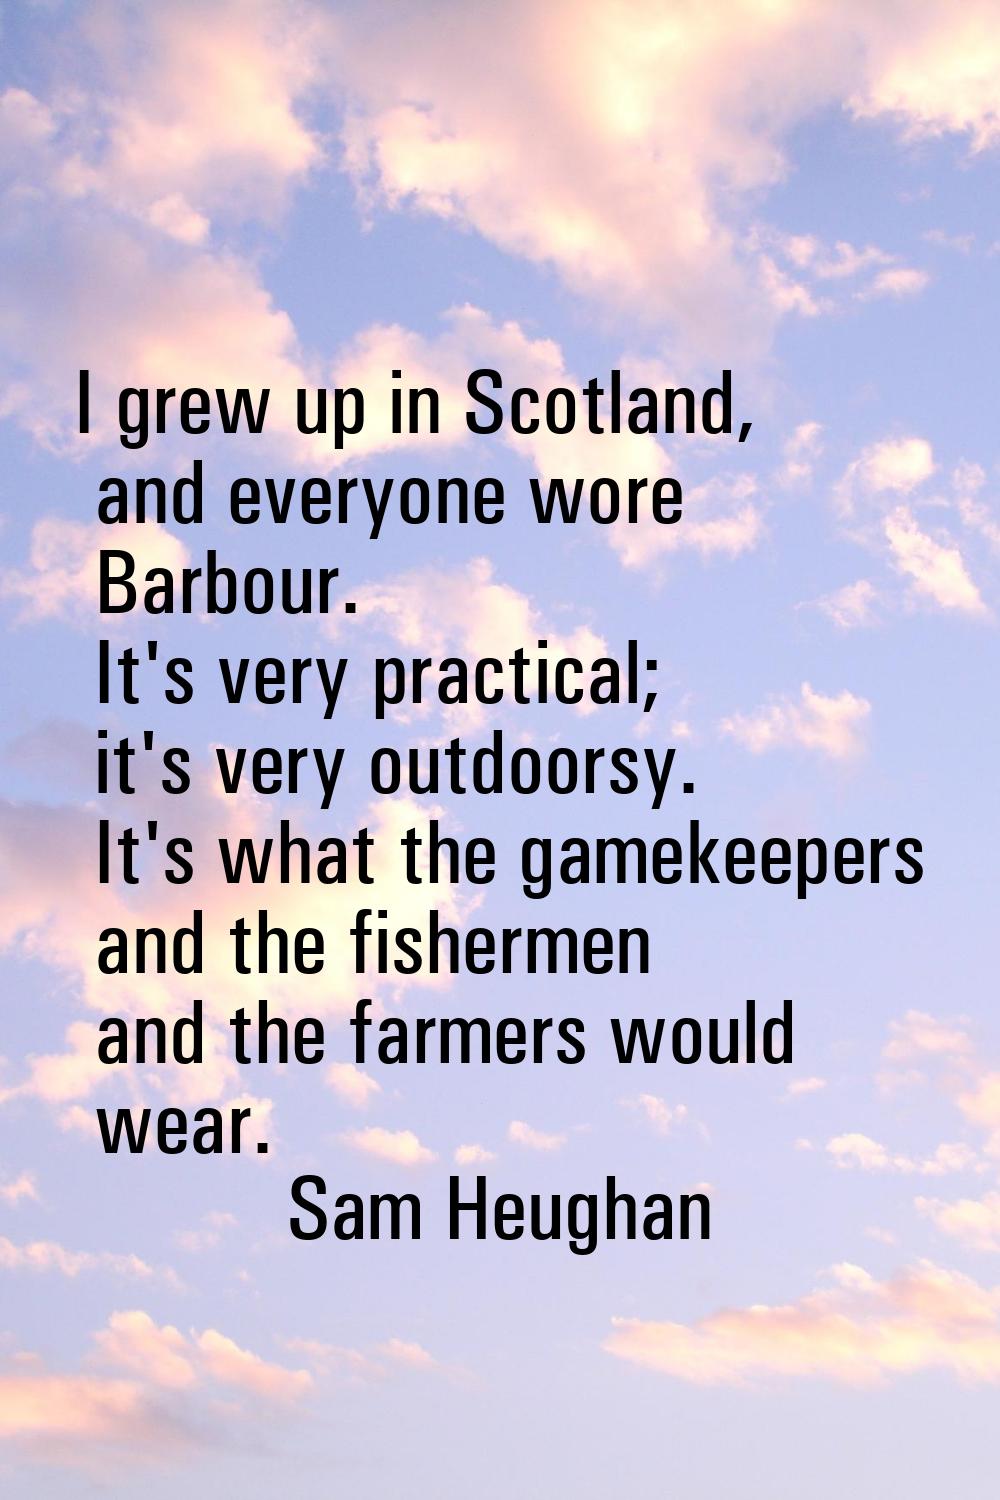 I grew up in Scotland, and everyone wore Barbour. It's very practical; it's very outdoorsy. It's wh